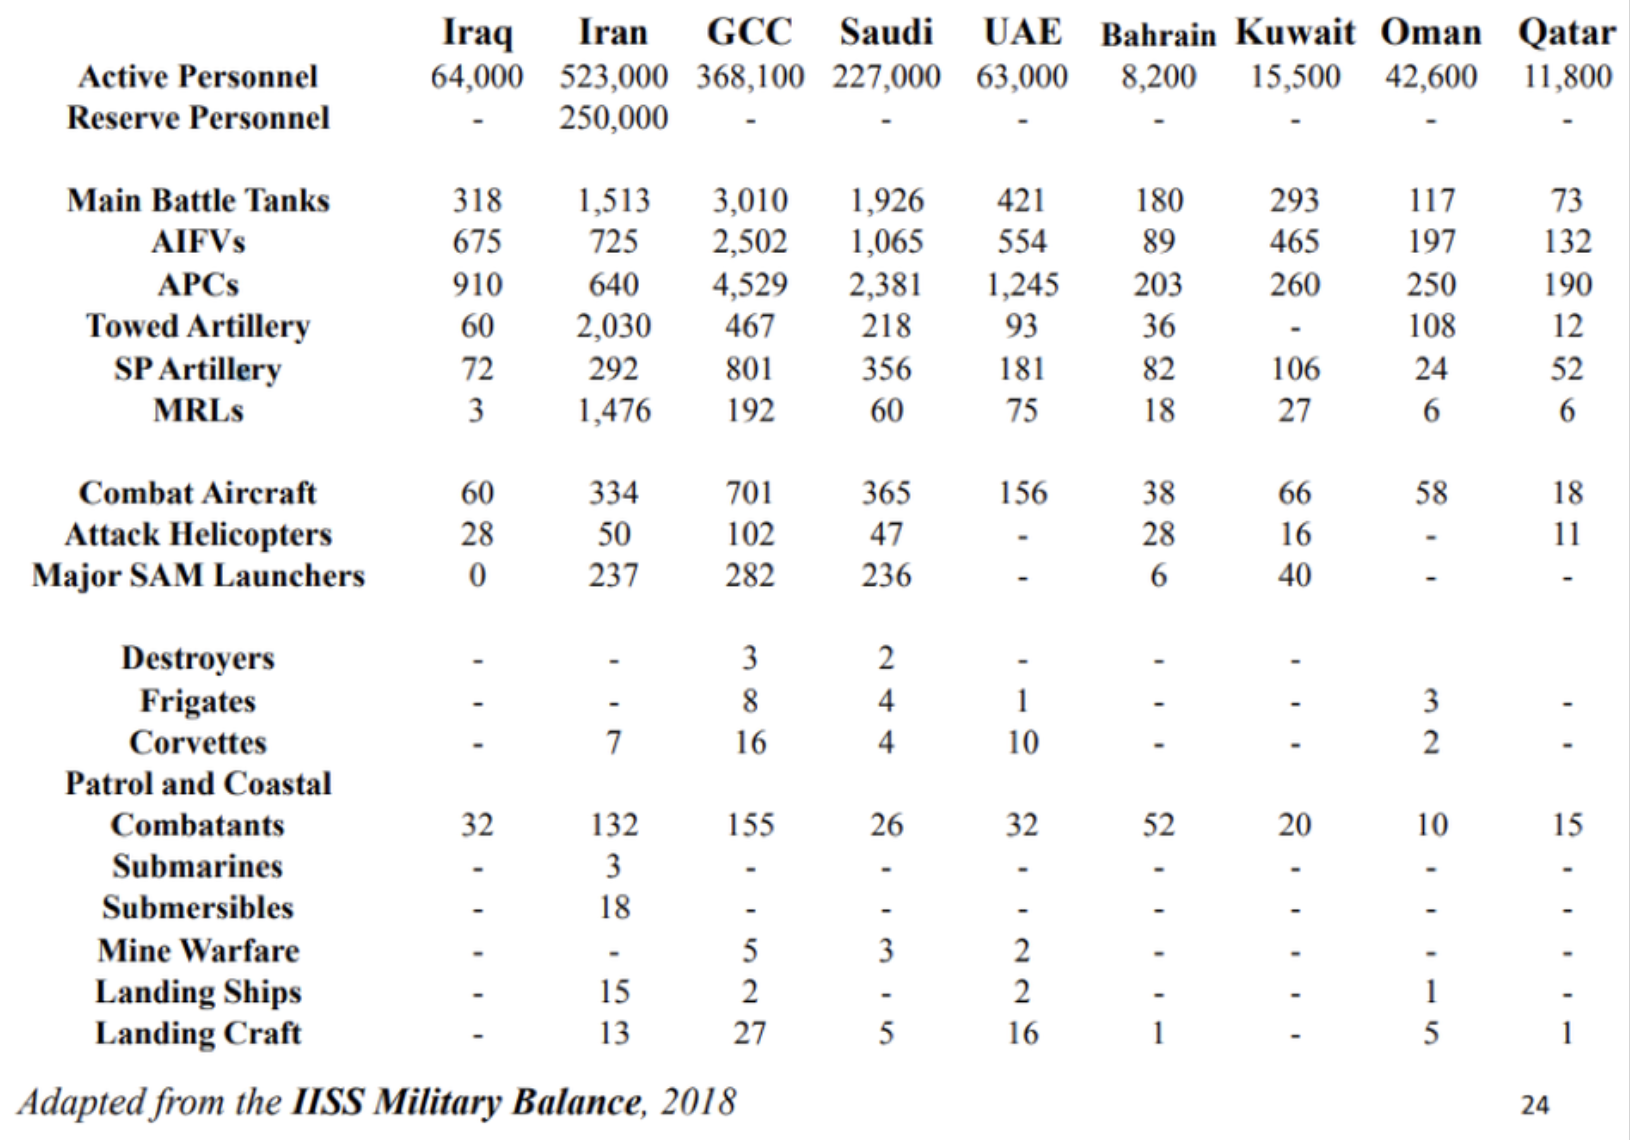 This table shows that Iran's military is larger than that of any of its neighbors.